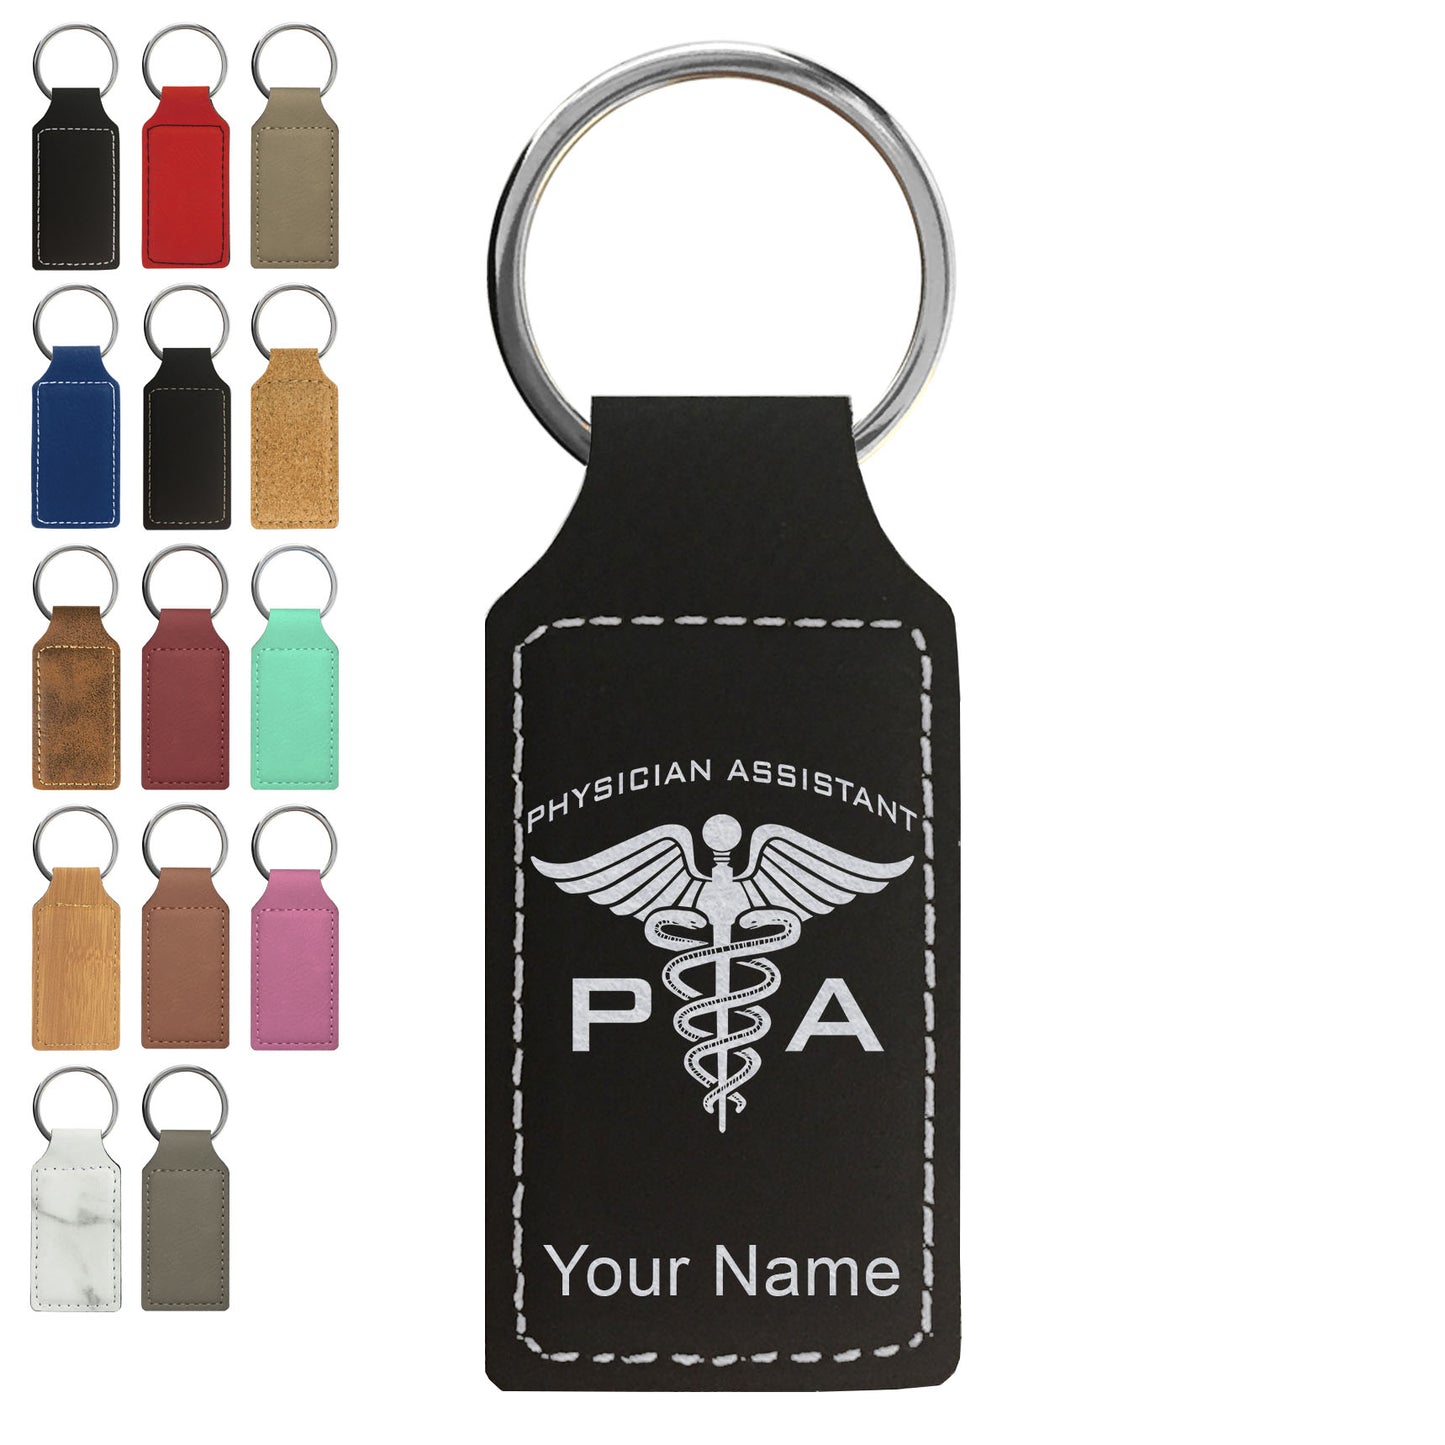 Faux Leather Rectangle Keychain, PA Physician Assistant, Personalized Engraving Included